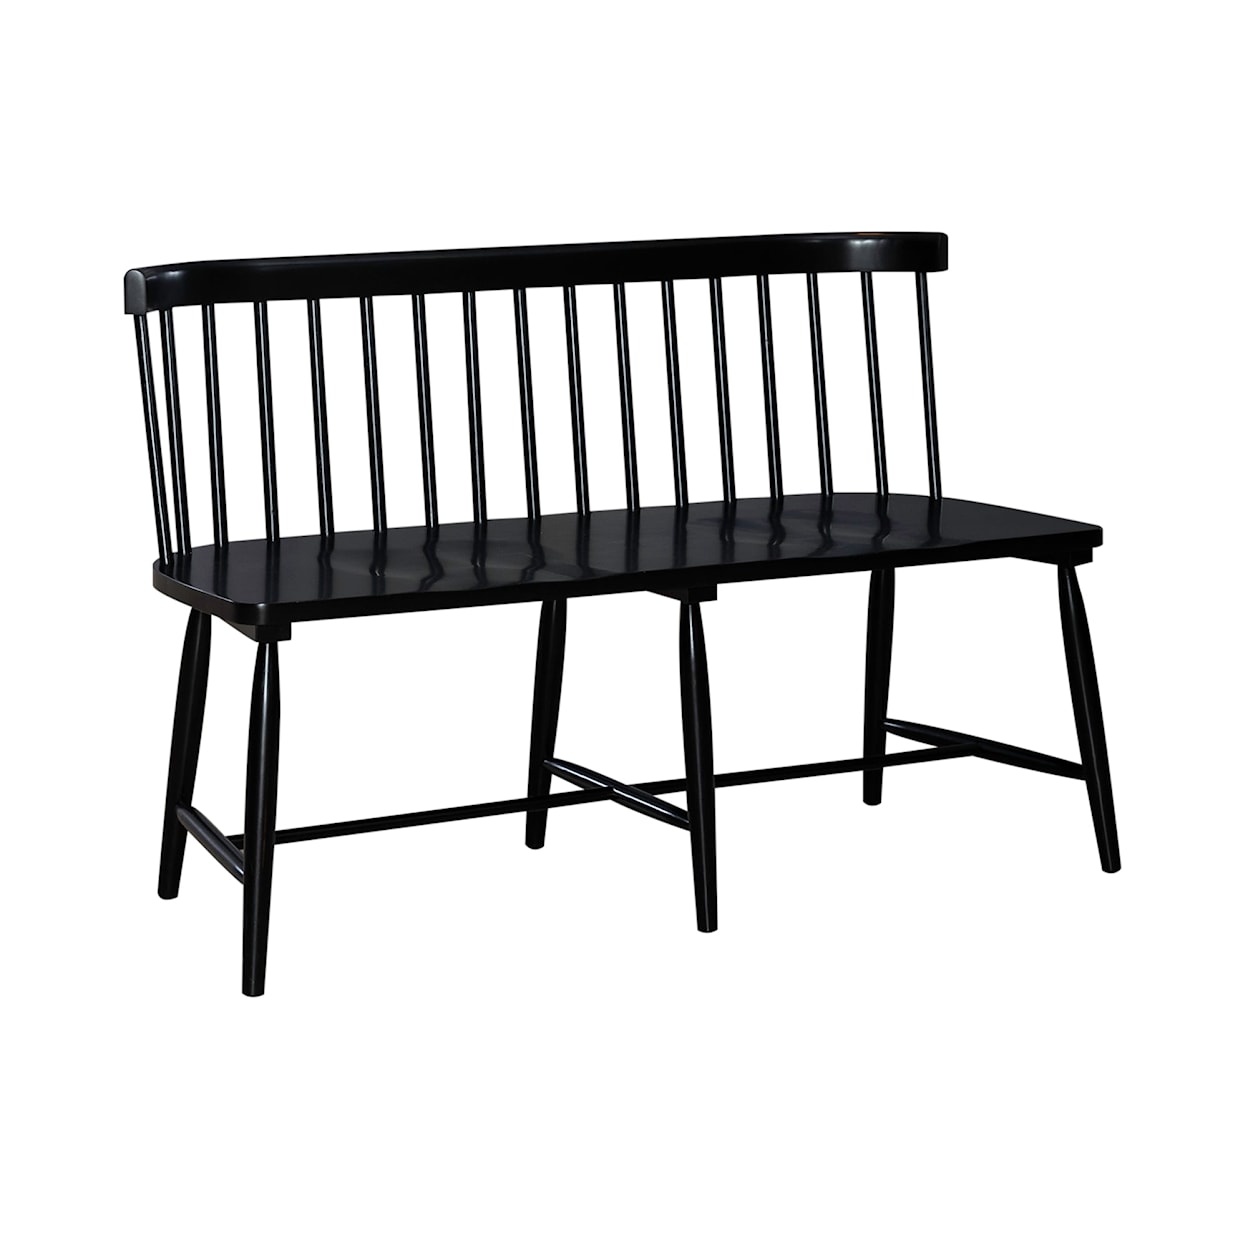 Libby Capeside Cottage Spindle Back Dining Bench